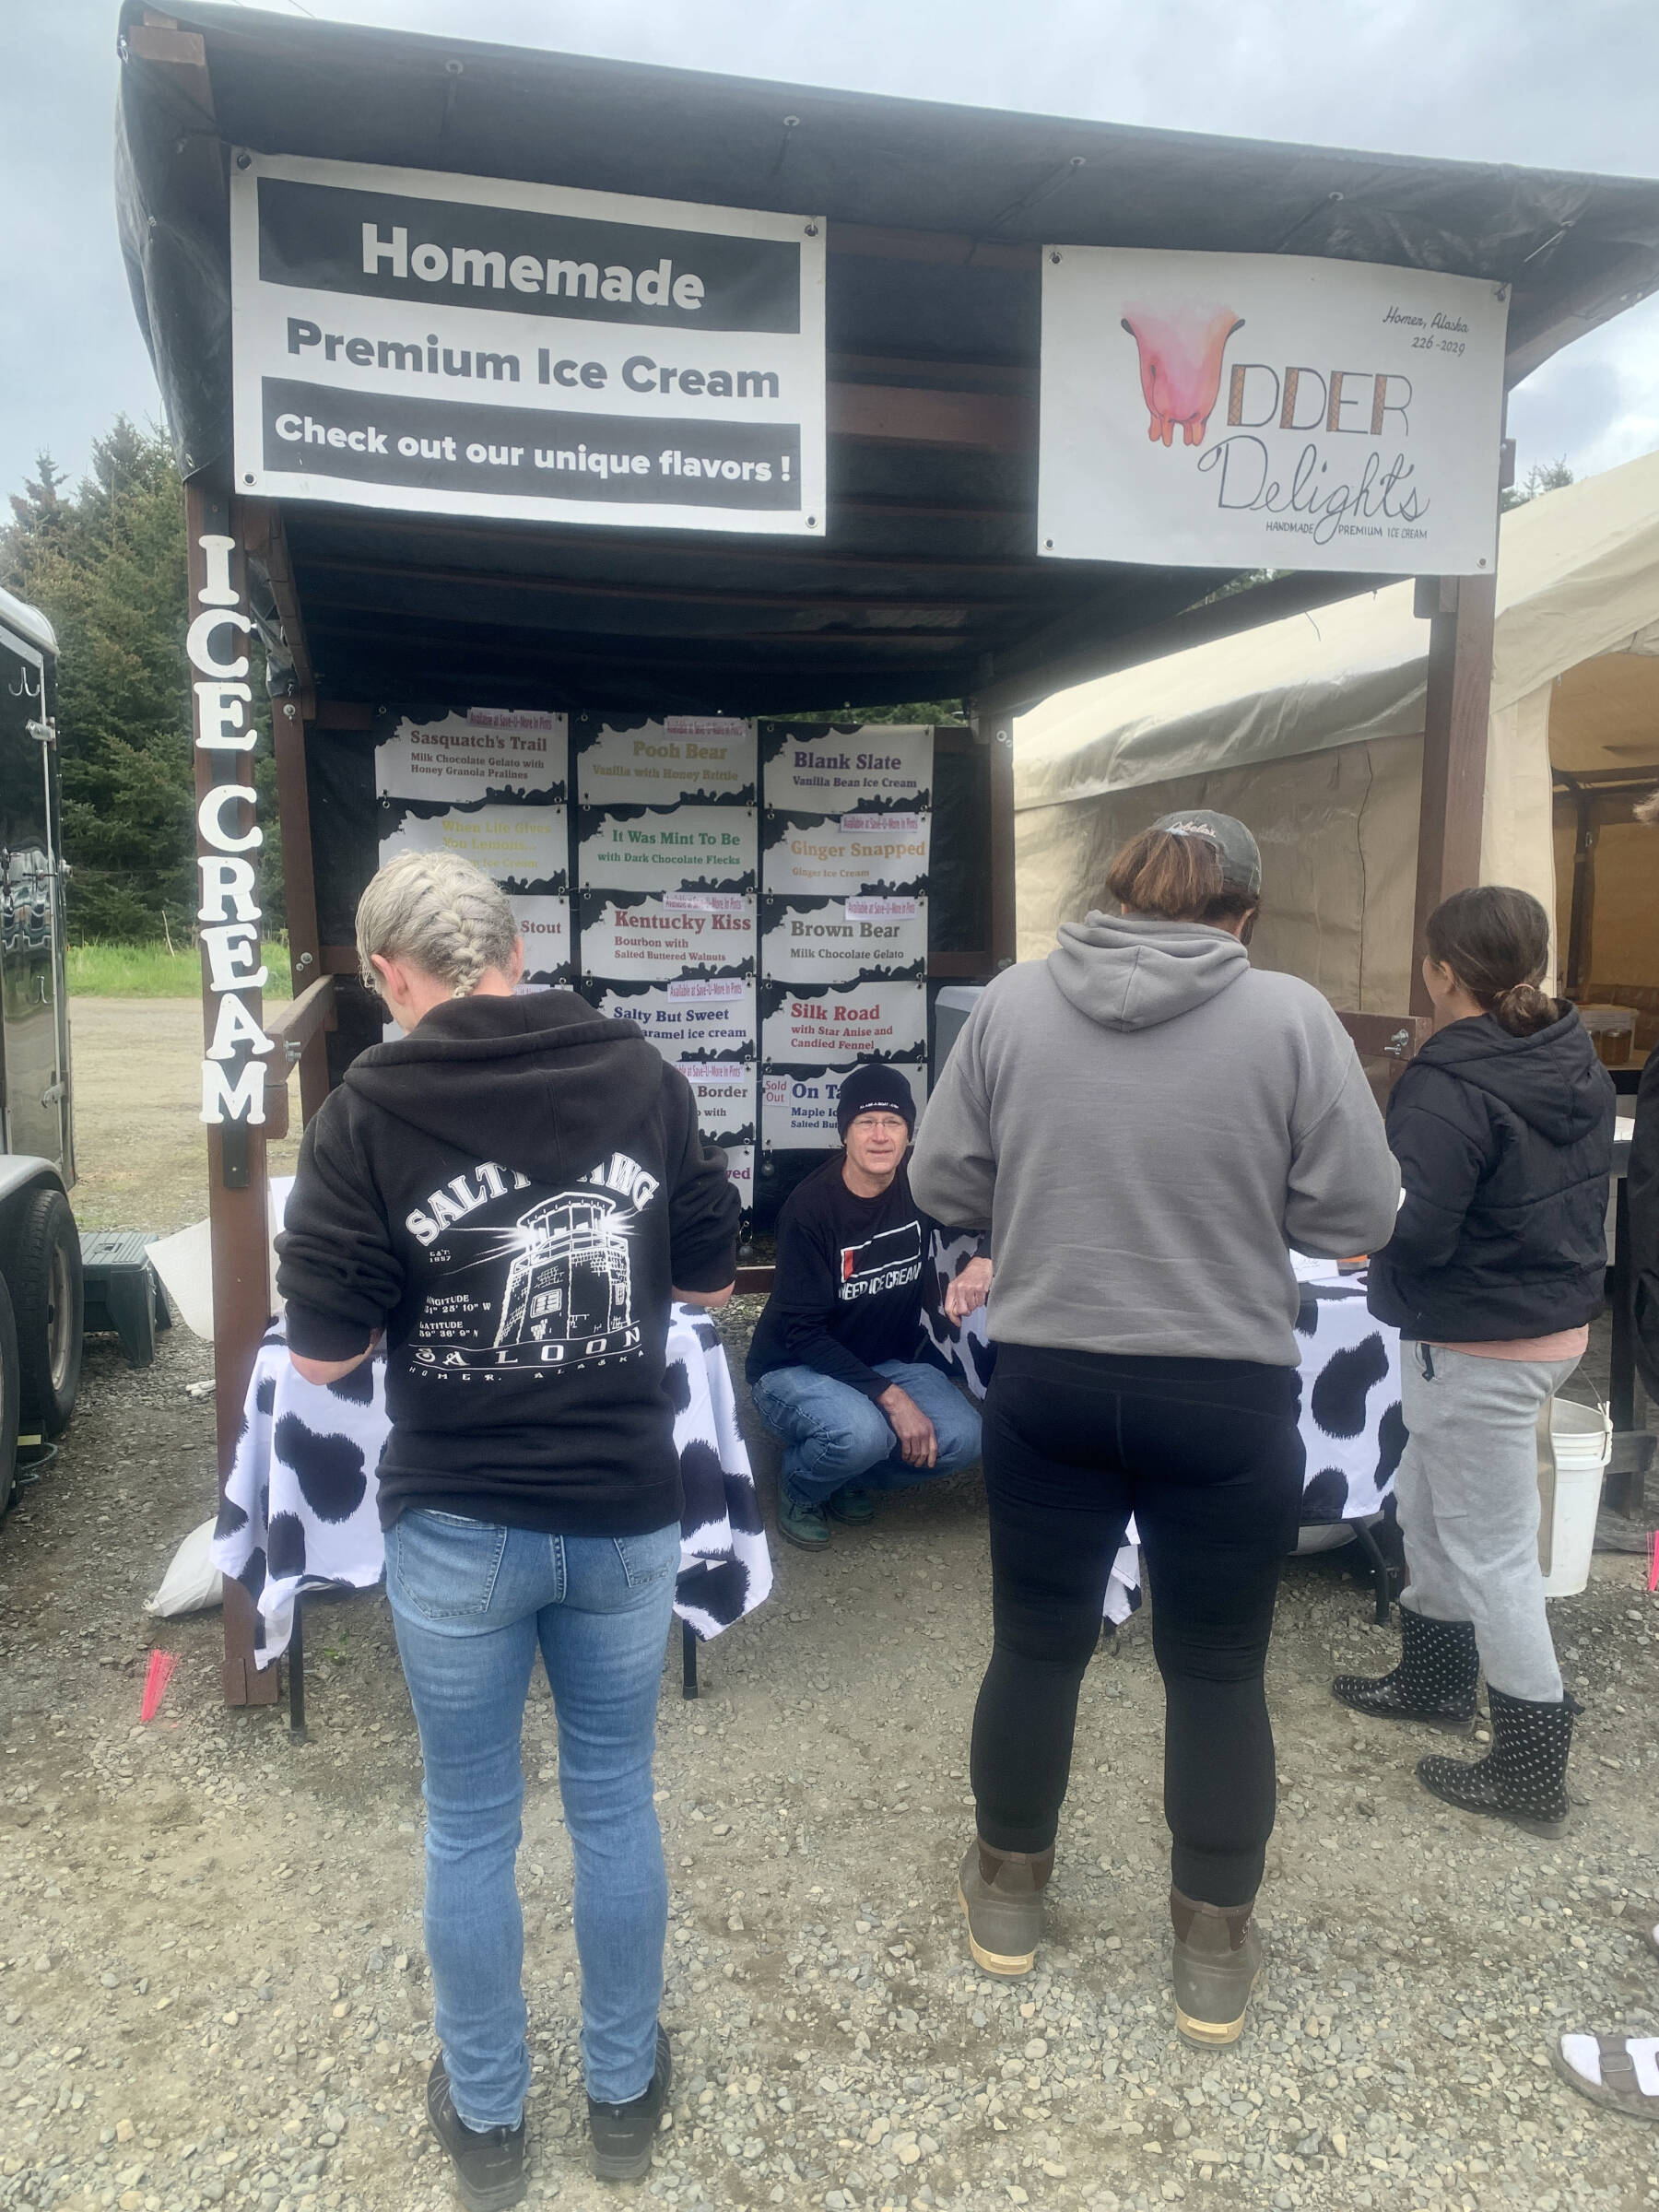 Udder Delights owner Todd Hindman helps customers at his booth at the Homer Farmers Market on Wednesday, May 31, 2023 in Homer, Alaska. Photo by Christina Whiting